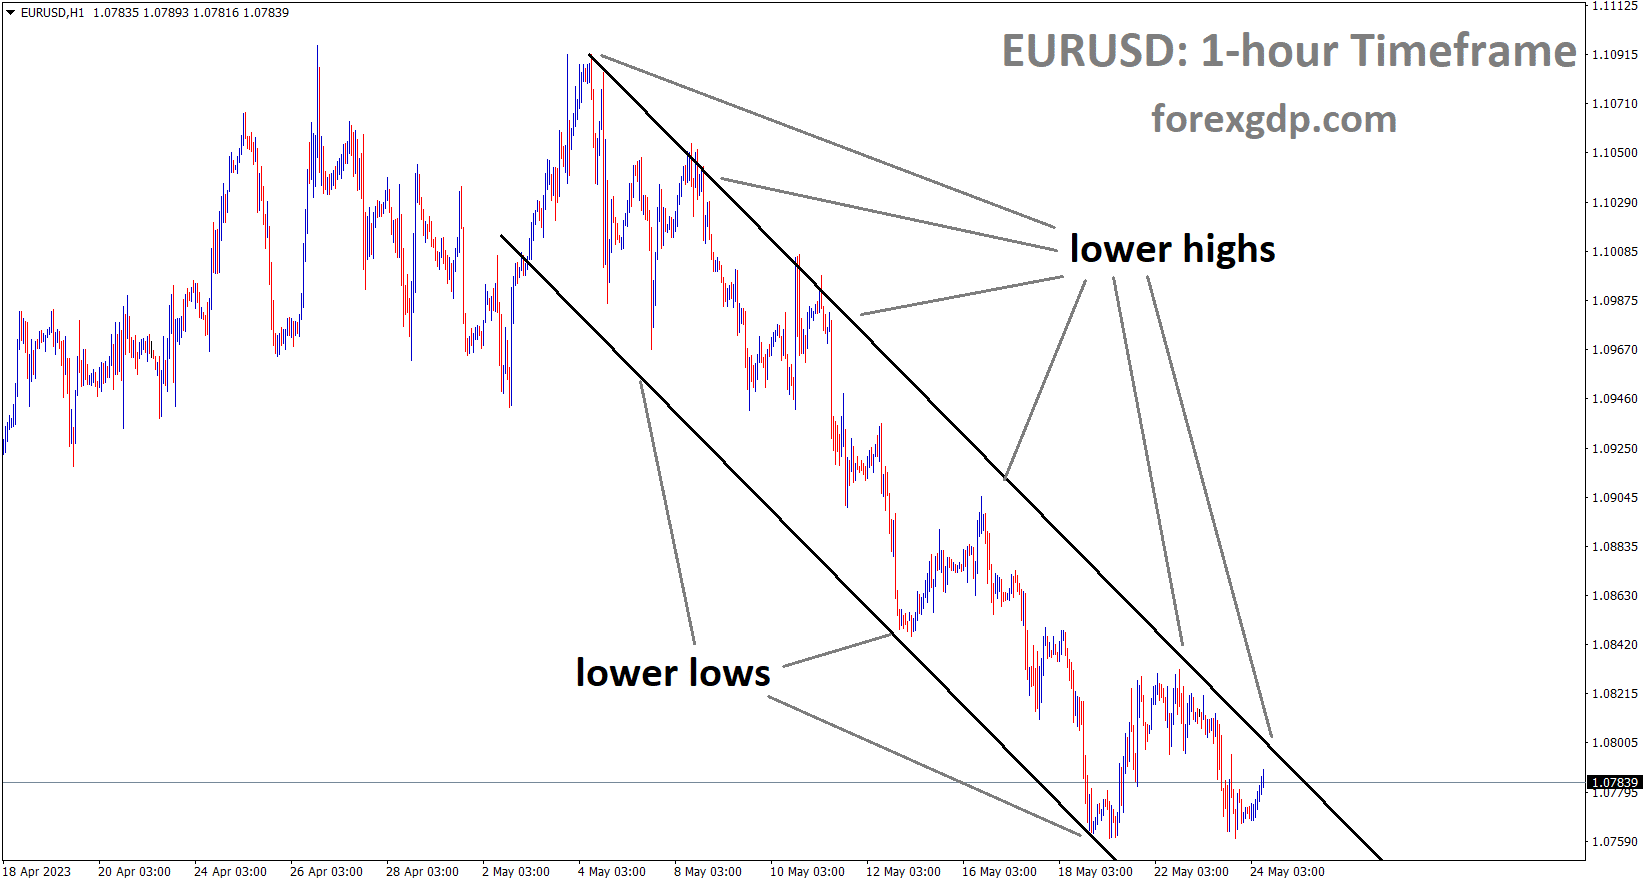 EURUSD H1 TF analysis market is moving in the Descending channel and the market has reached the lower high area of the channel